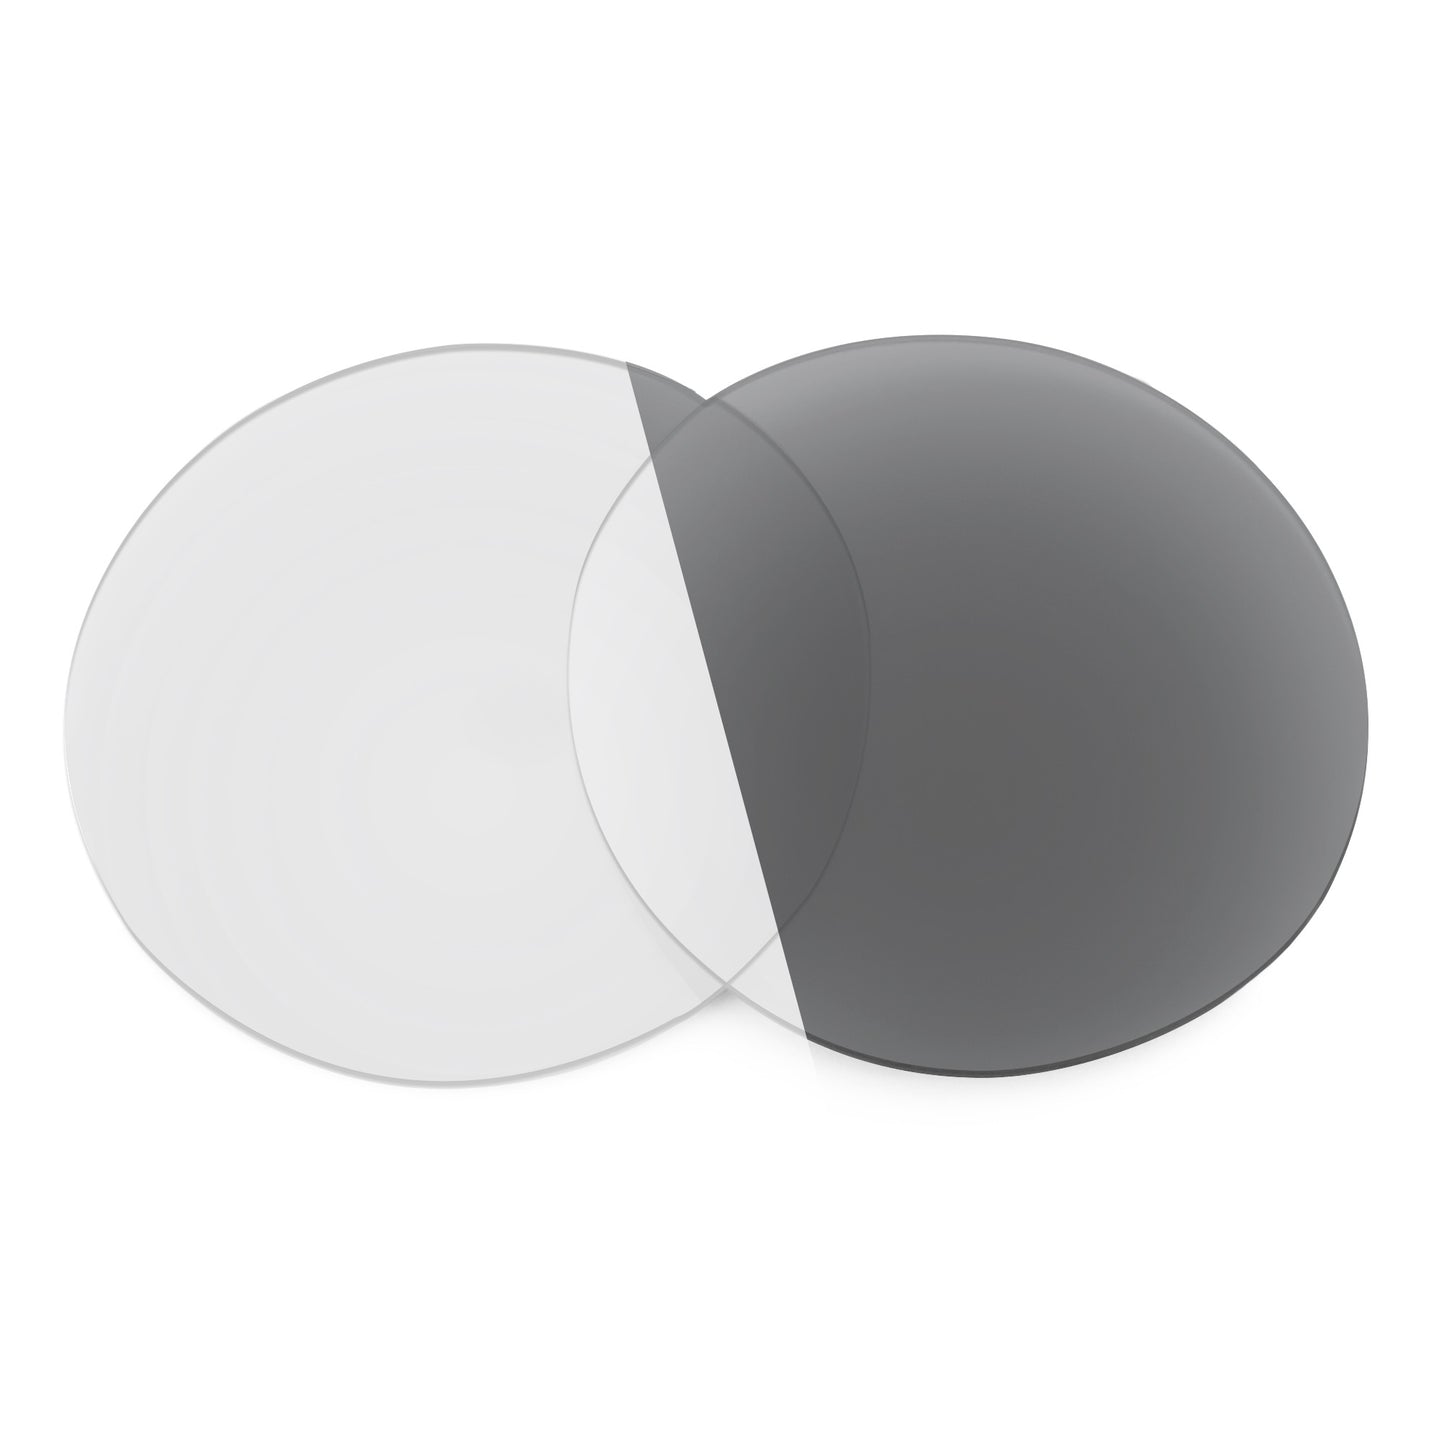 Revant replacement lenses for Ray-Ban RB4242 49mm Non-Polarized Adapt Gray Photochromic